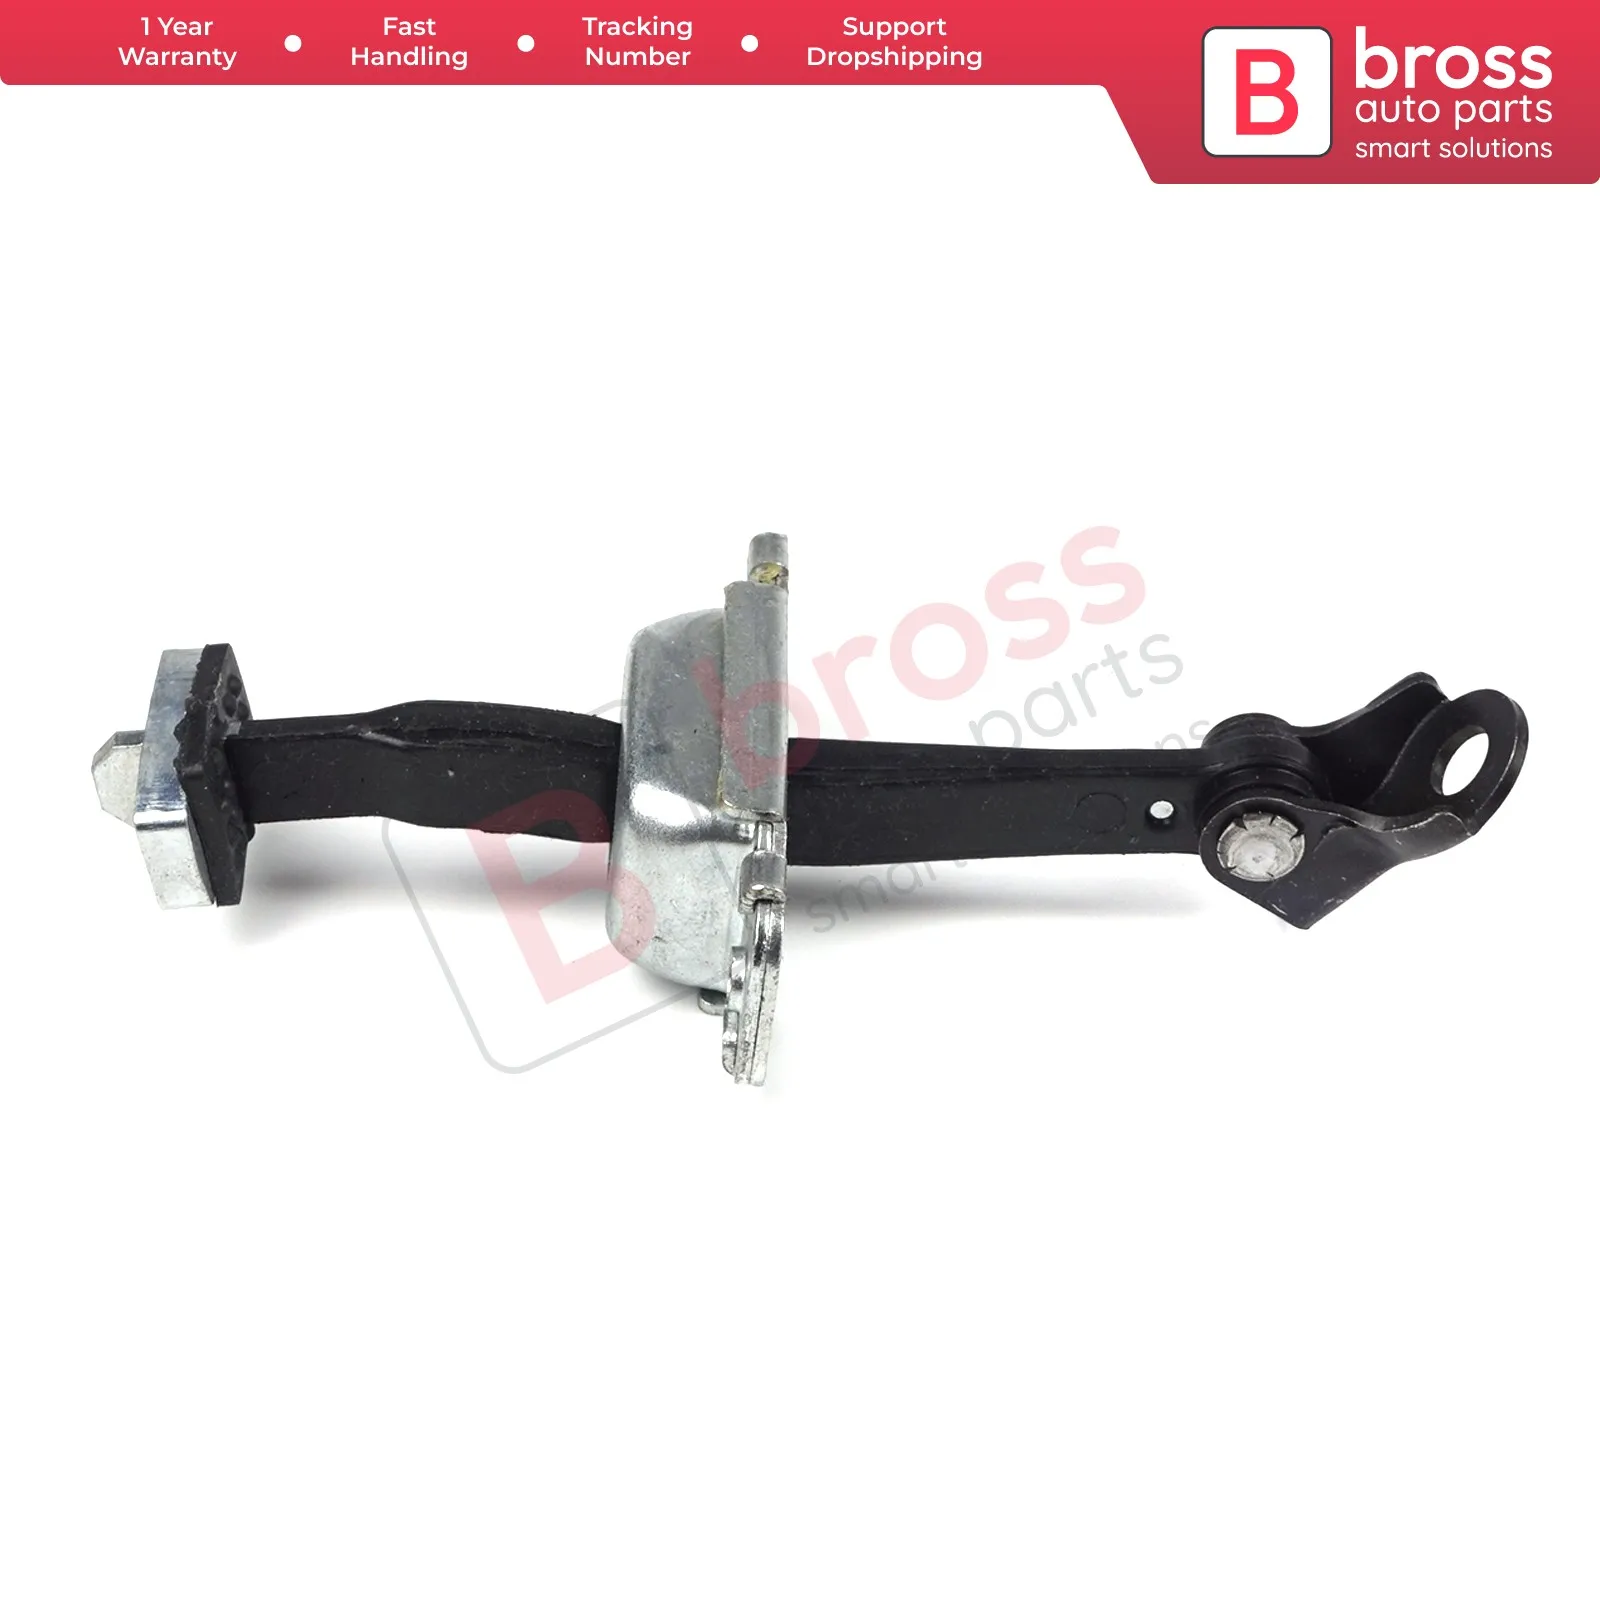 

Bross Auto Parts BDP788 Front Door Hinge Stop Check Strap Limiter 79380 2L000 for Hyundai I30 MK1 2007-2012 Ship From Turkey